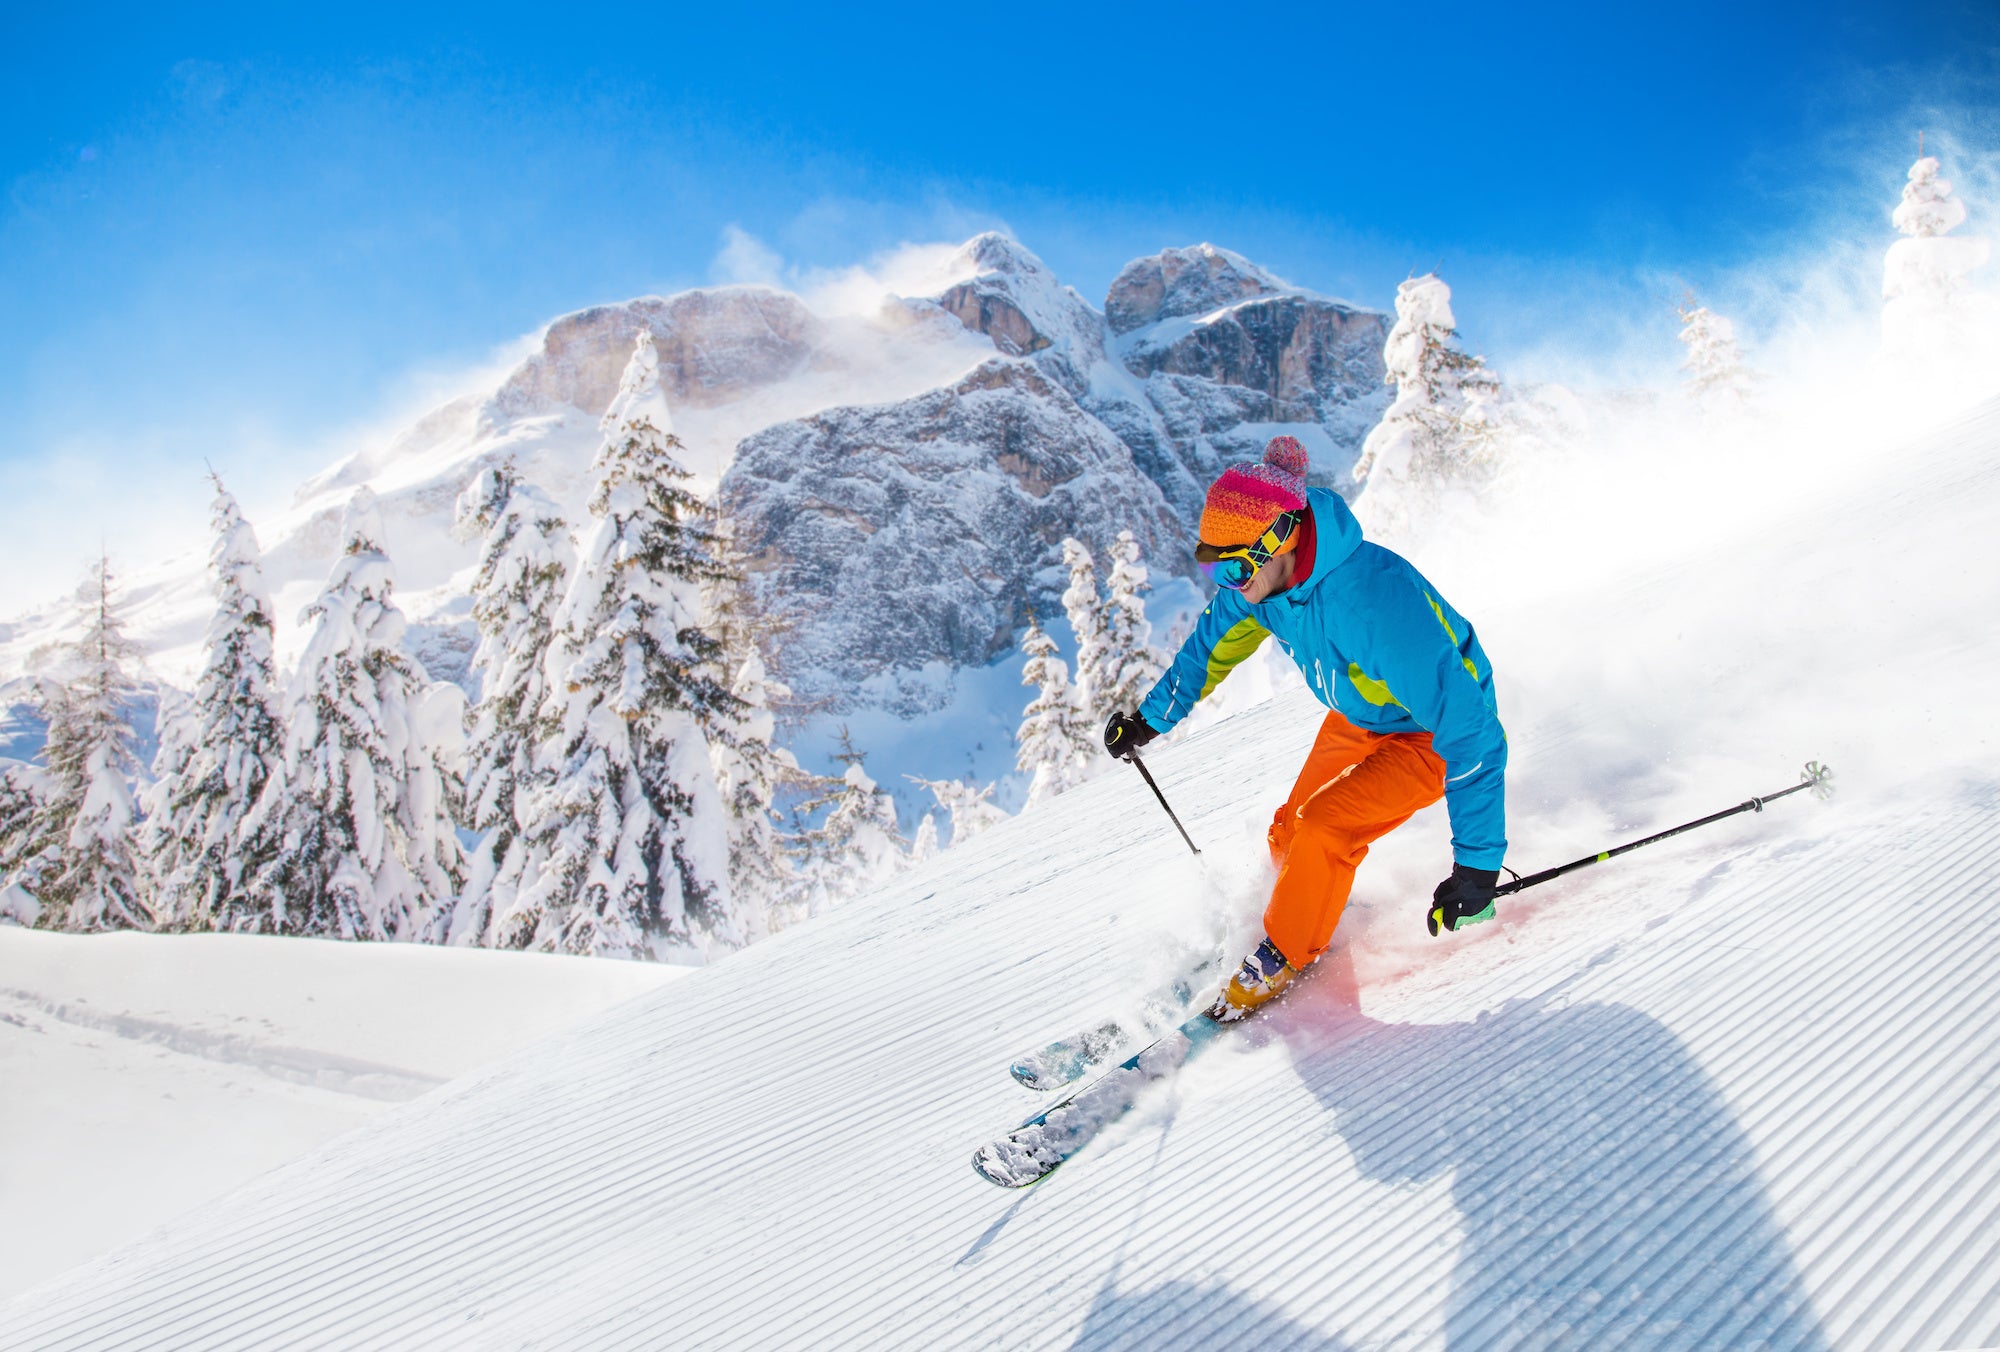 6 Ways to Avoid Back Pain from Skiing or Snowboarding